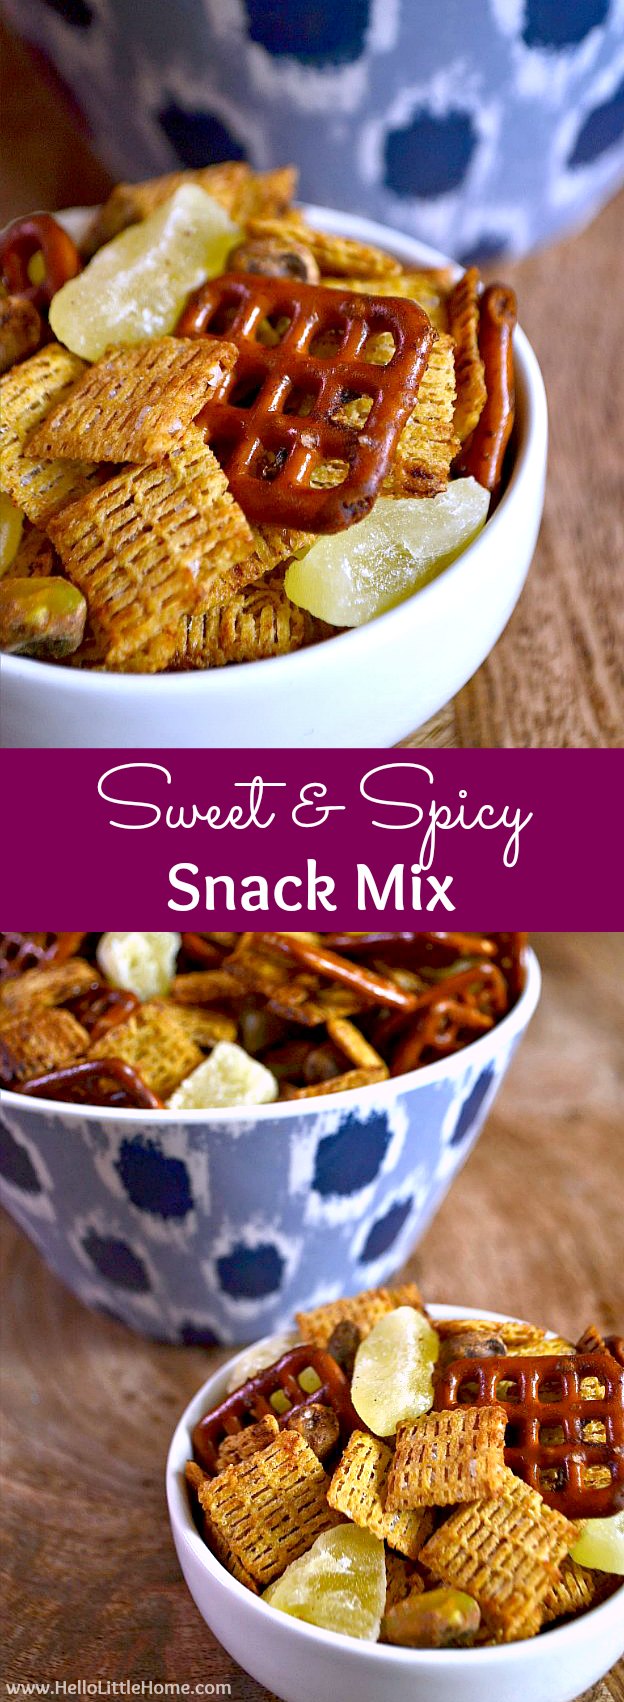 Sweet and Spicy Snack Mix ... the perfect appetizer for any party and a great game day recipe! | Hello Little Home